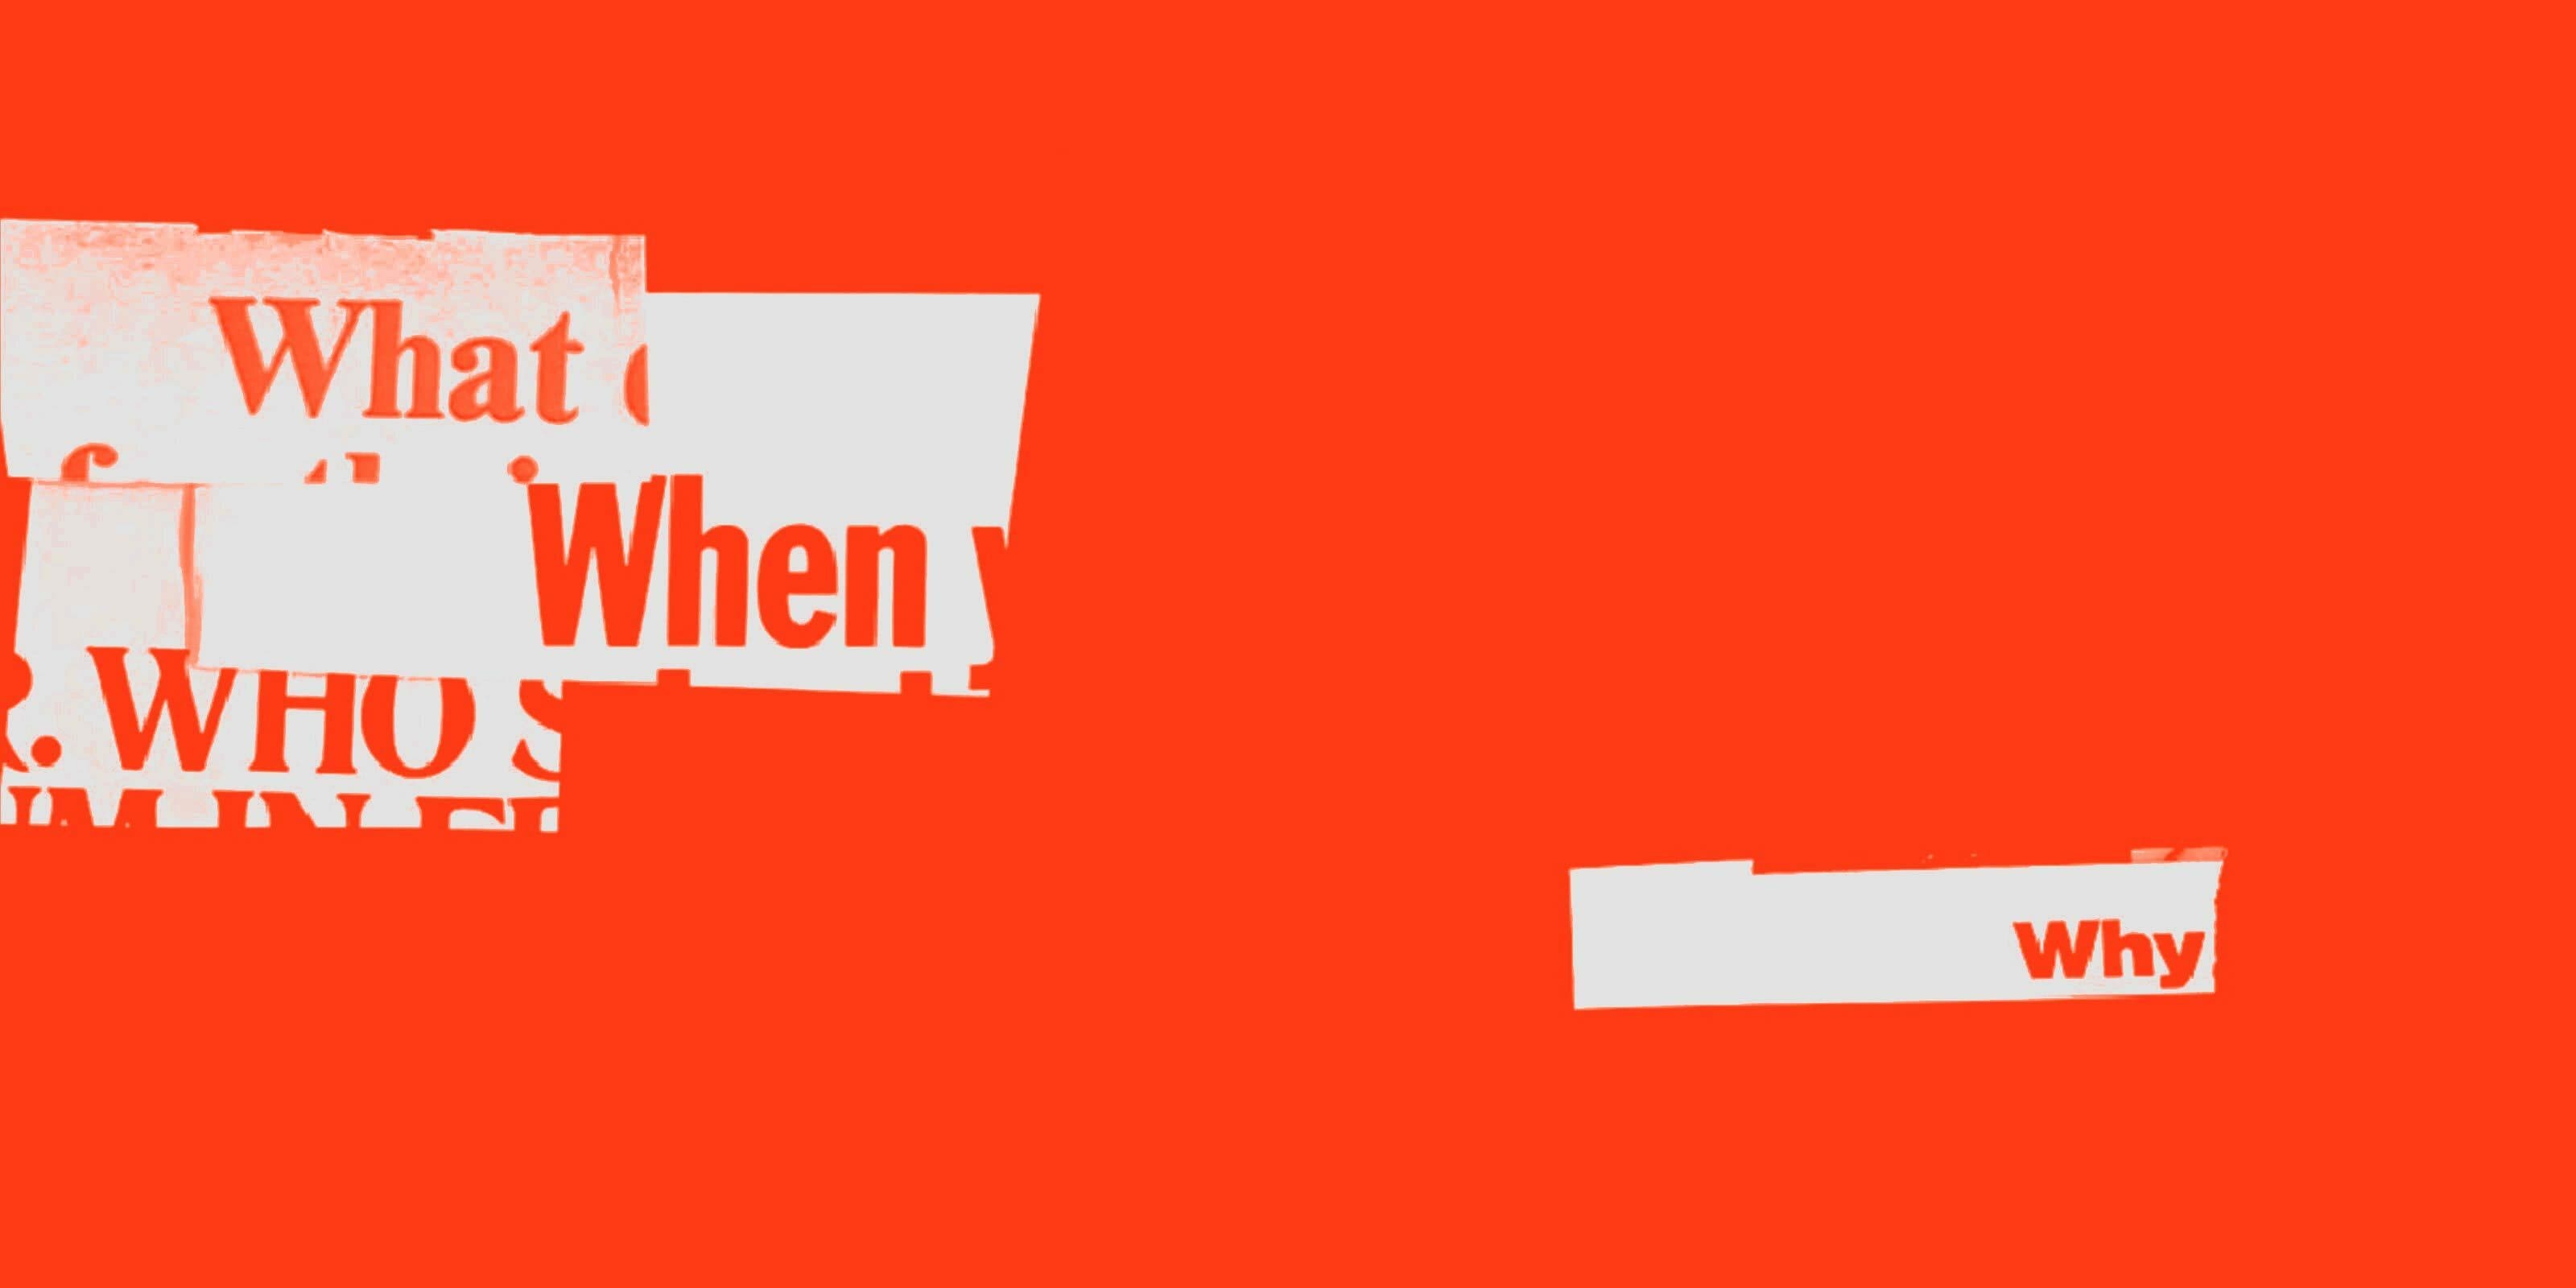 A bright red background with white text fragments arranged randomly. The visible words include "What," "When," "Who," and "Why." The text appears in a bold, sans-serif font and is partially obscured or cut off in places.